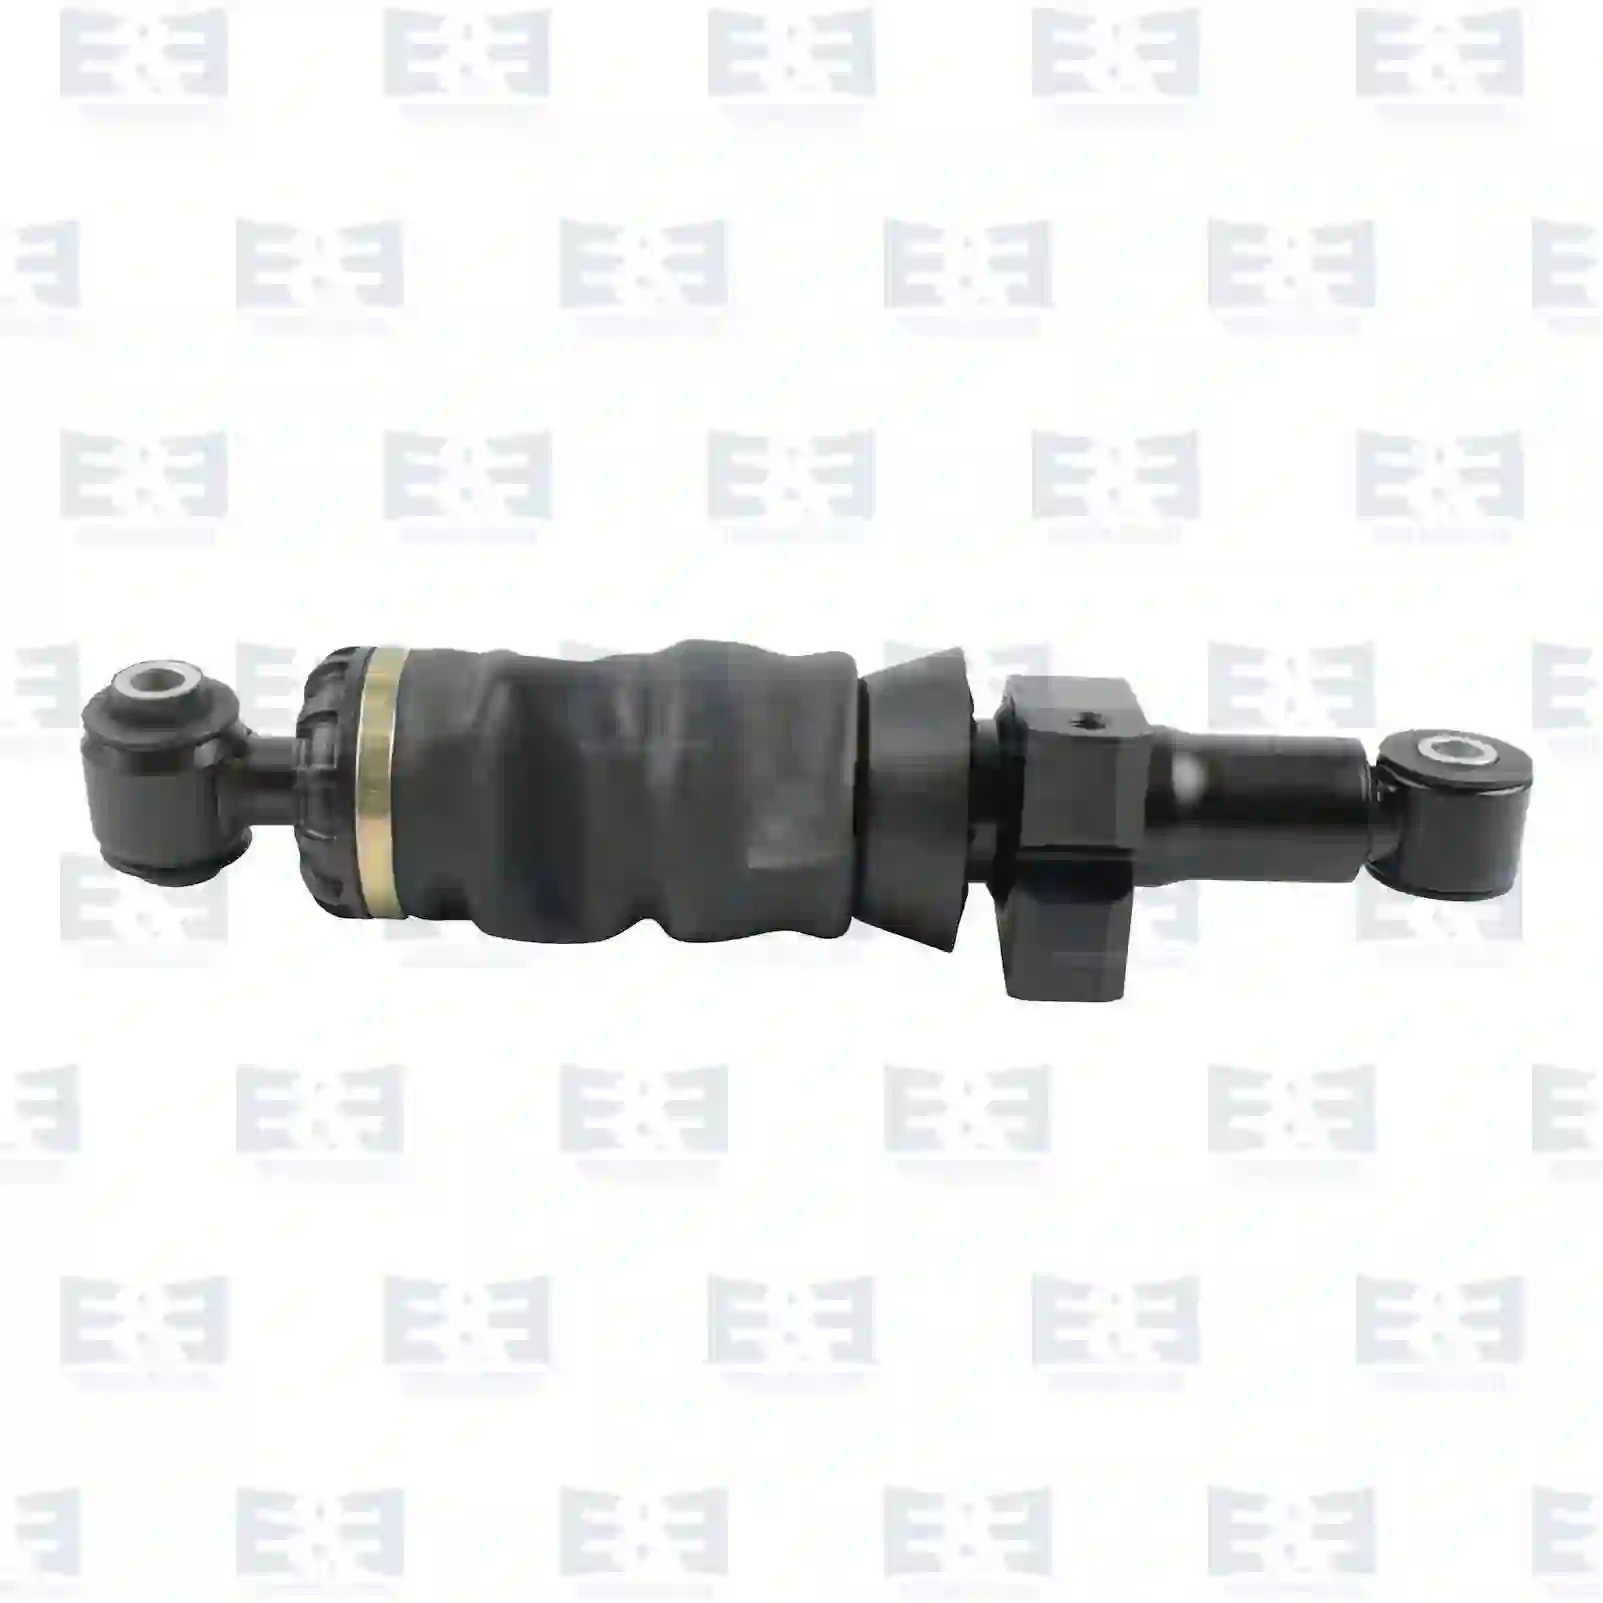 Cabin shock absorber, with air bellow, 2E2275512, 41028763, 41028764, 500348793, 500377878, ||  2E2275512 E&E Truck Spare Parts | Truck Spare Parts, Auotomotive Spare Parts Cabin shock absorber, with air bellow, 2E2275512, 41028763, 41028764, 500348793, 500377878, ||  2E2275512 E&E Truck Spare Parts | Truck Spare Parts, Auotomotive Spare Parts